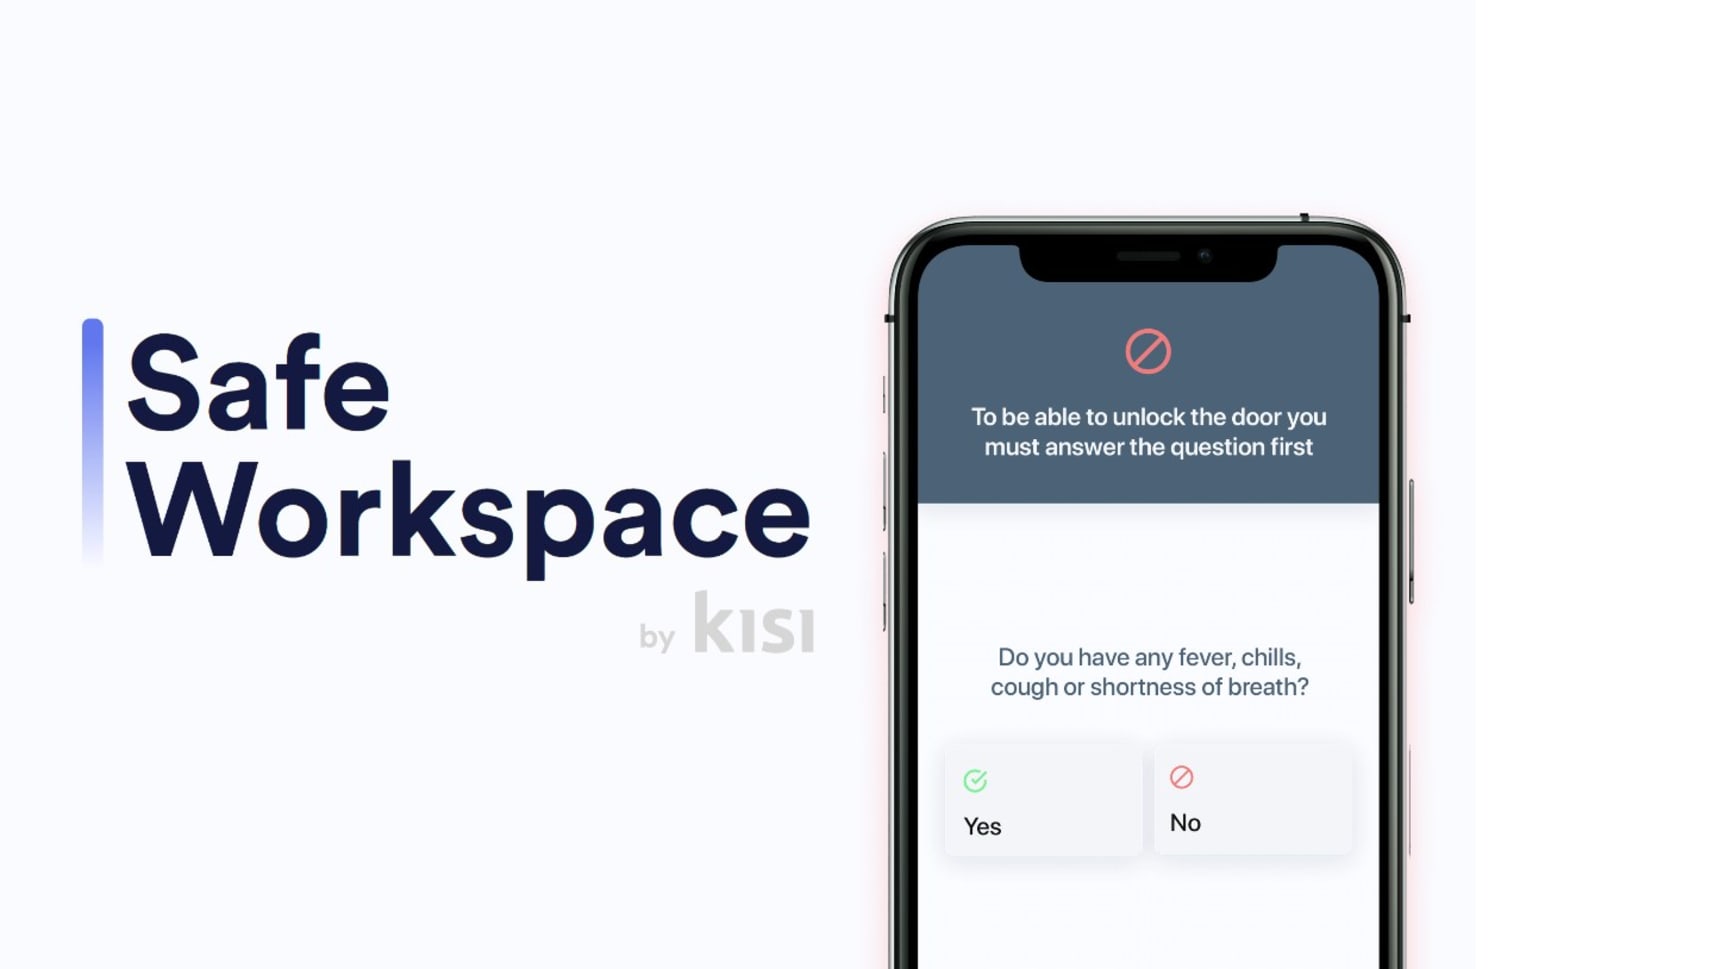 Introducing Safe Workspace by Kisi